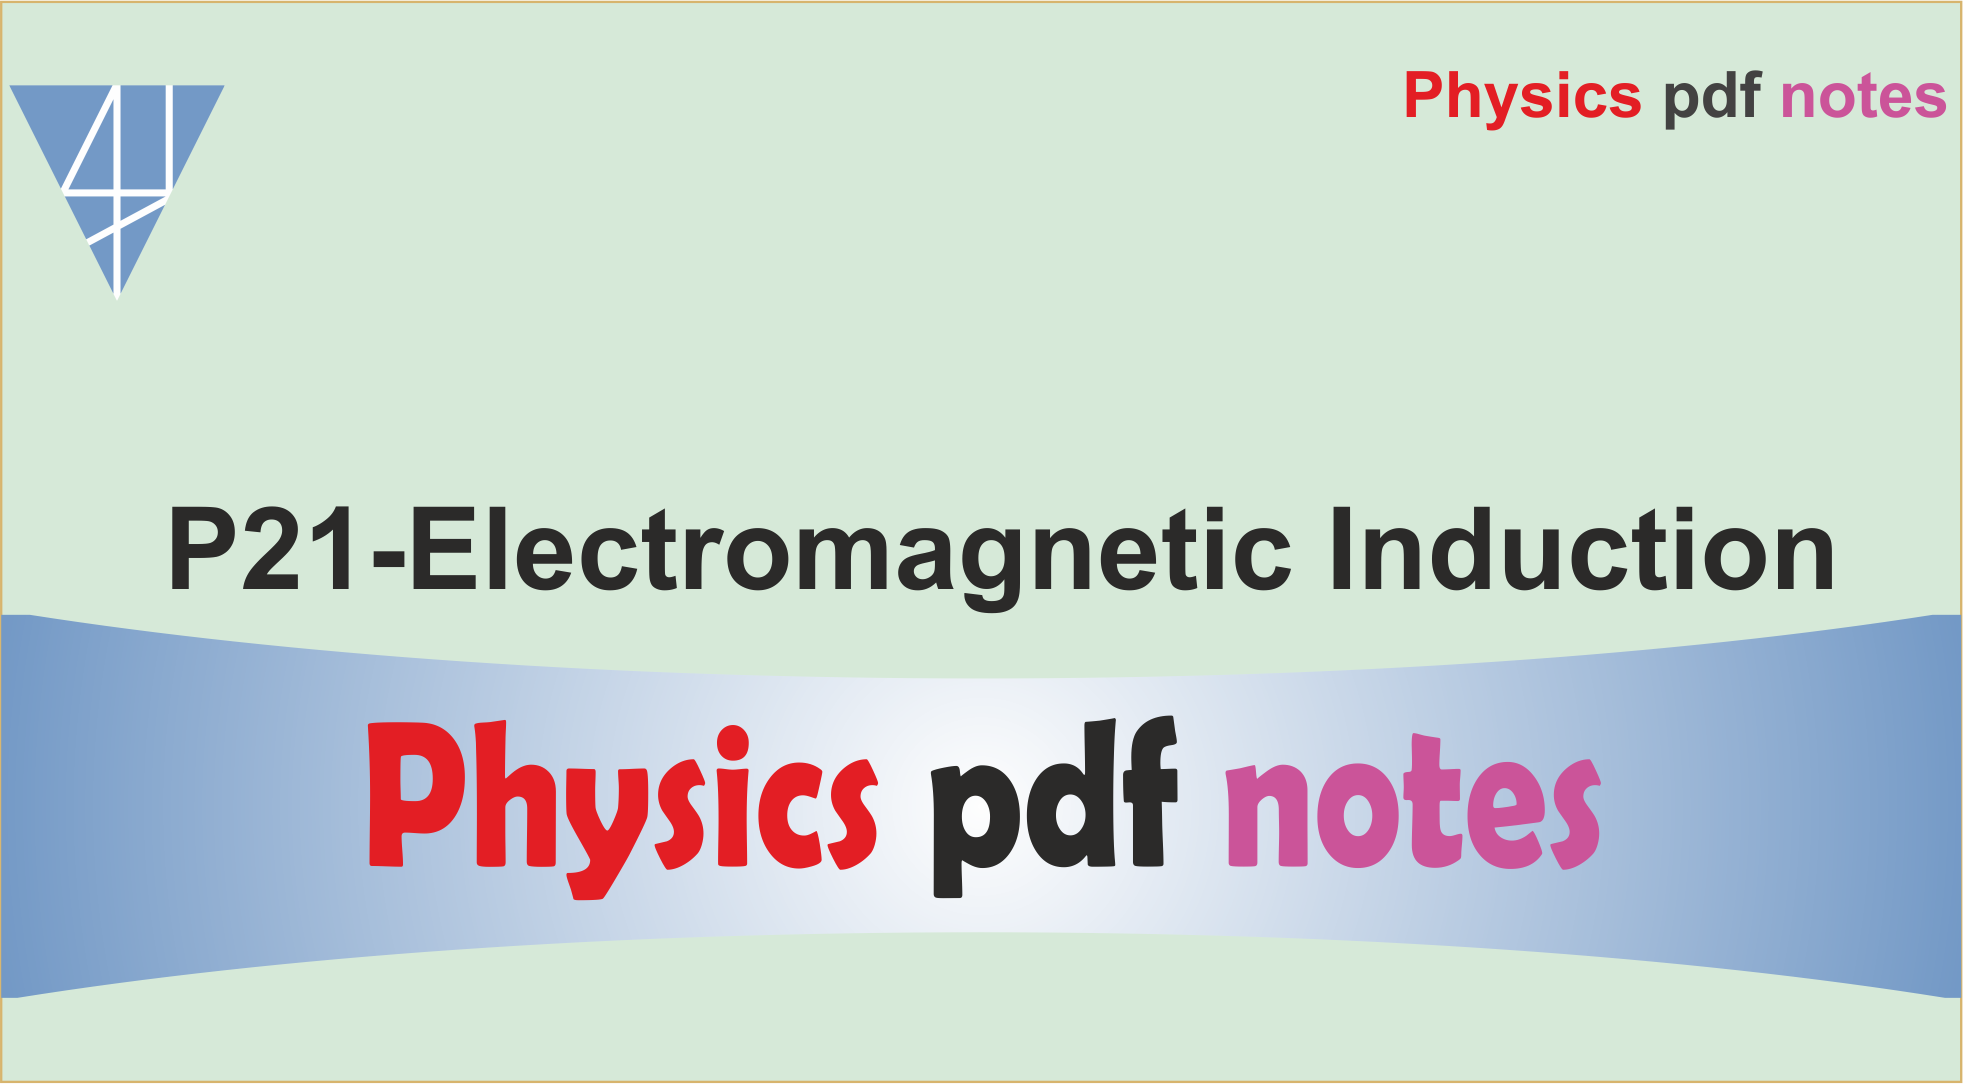 P21-Electromagnetic Induction